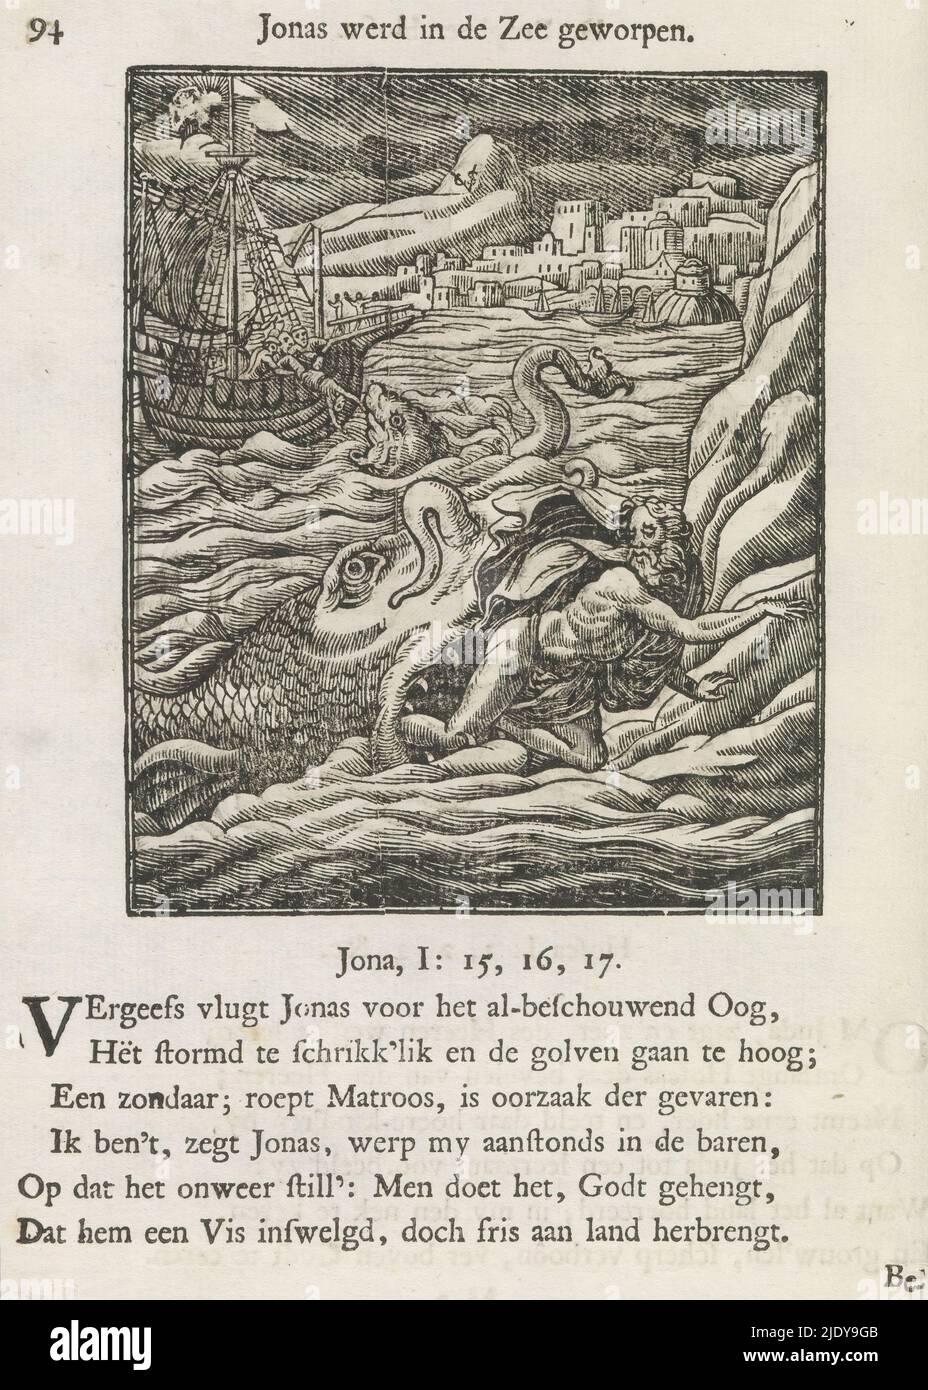 Jonah and the whale, Jonah was thrown into the sea (title on object), During the heavy storm, Jonah is thrown overboard by the fishermen. He is swallowed by a whale. After surviving three days and nights in the belly of the fish, the fish spits Jonah out onto land. Above the scene a title. Below it six lines of verse and a reference to Jonah 1: 15-17. The print is part of an album., print maker: Christoffel van Sichem (II), (mentioned on object), print maker: Christoffel van Sichem (III), (mentioned on object), publisher: Jan Klooster, Amsterdam, 1645 - 1646 and/or 1740, paper, letterpress pri Stock Photo